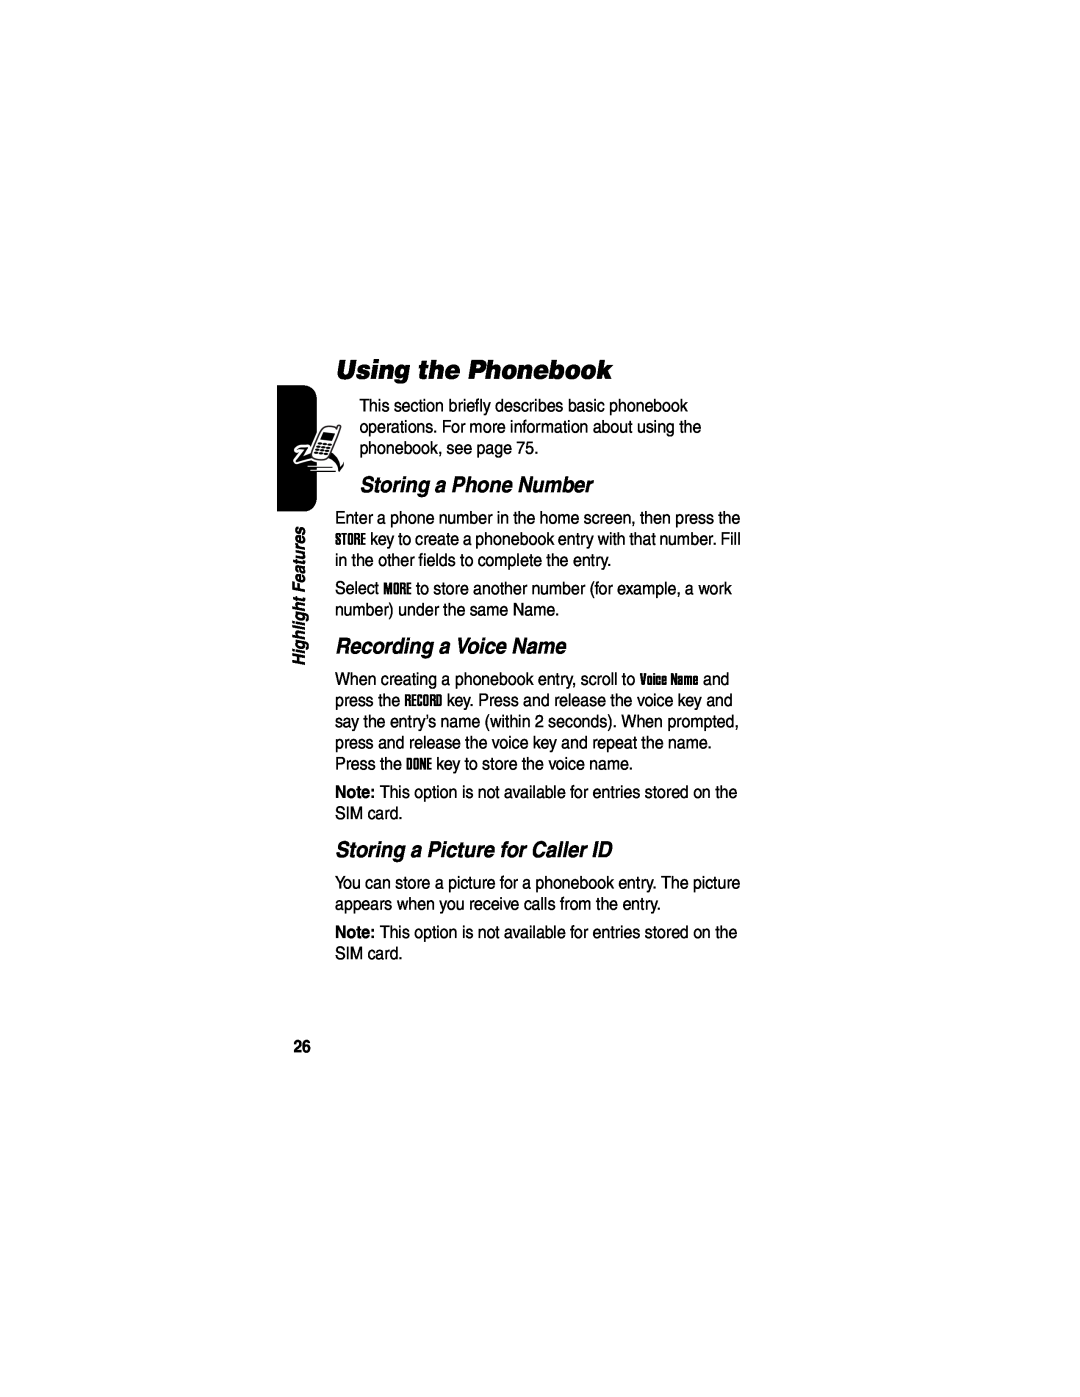 Motorola V635 manual Using the Phonebook, Storing a Phone Number, Recording a Voice Name, Storing a Picture for Caller ID 